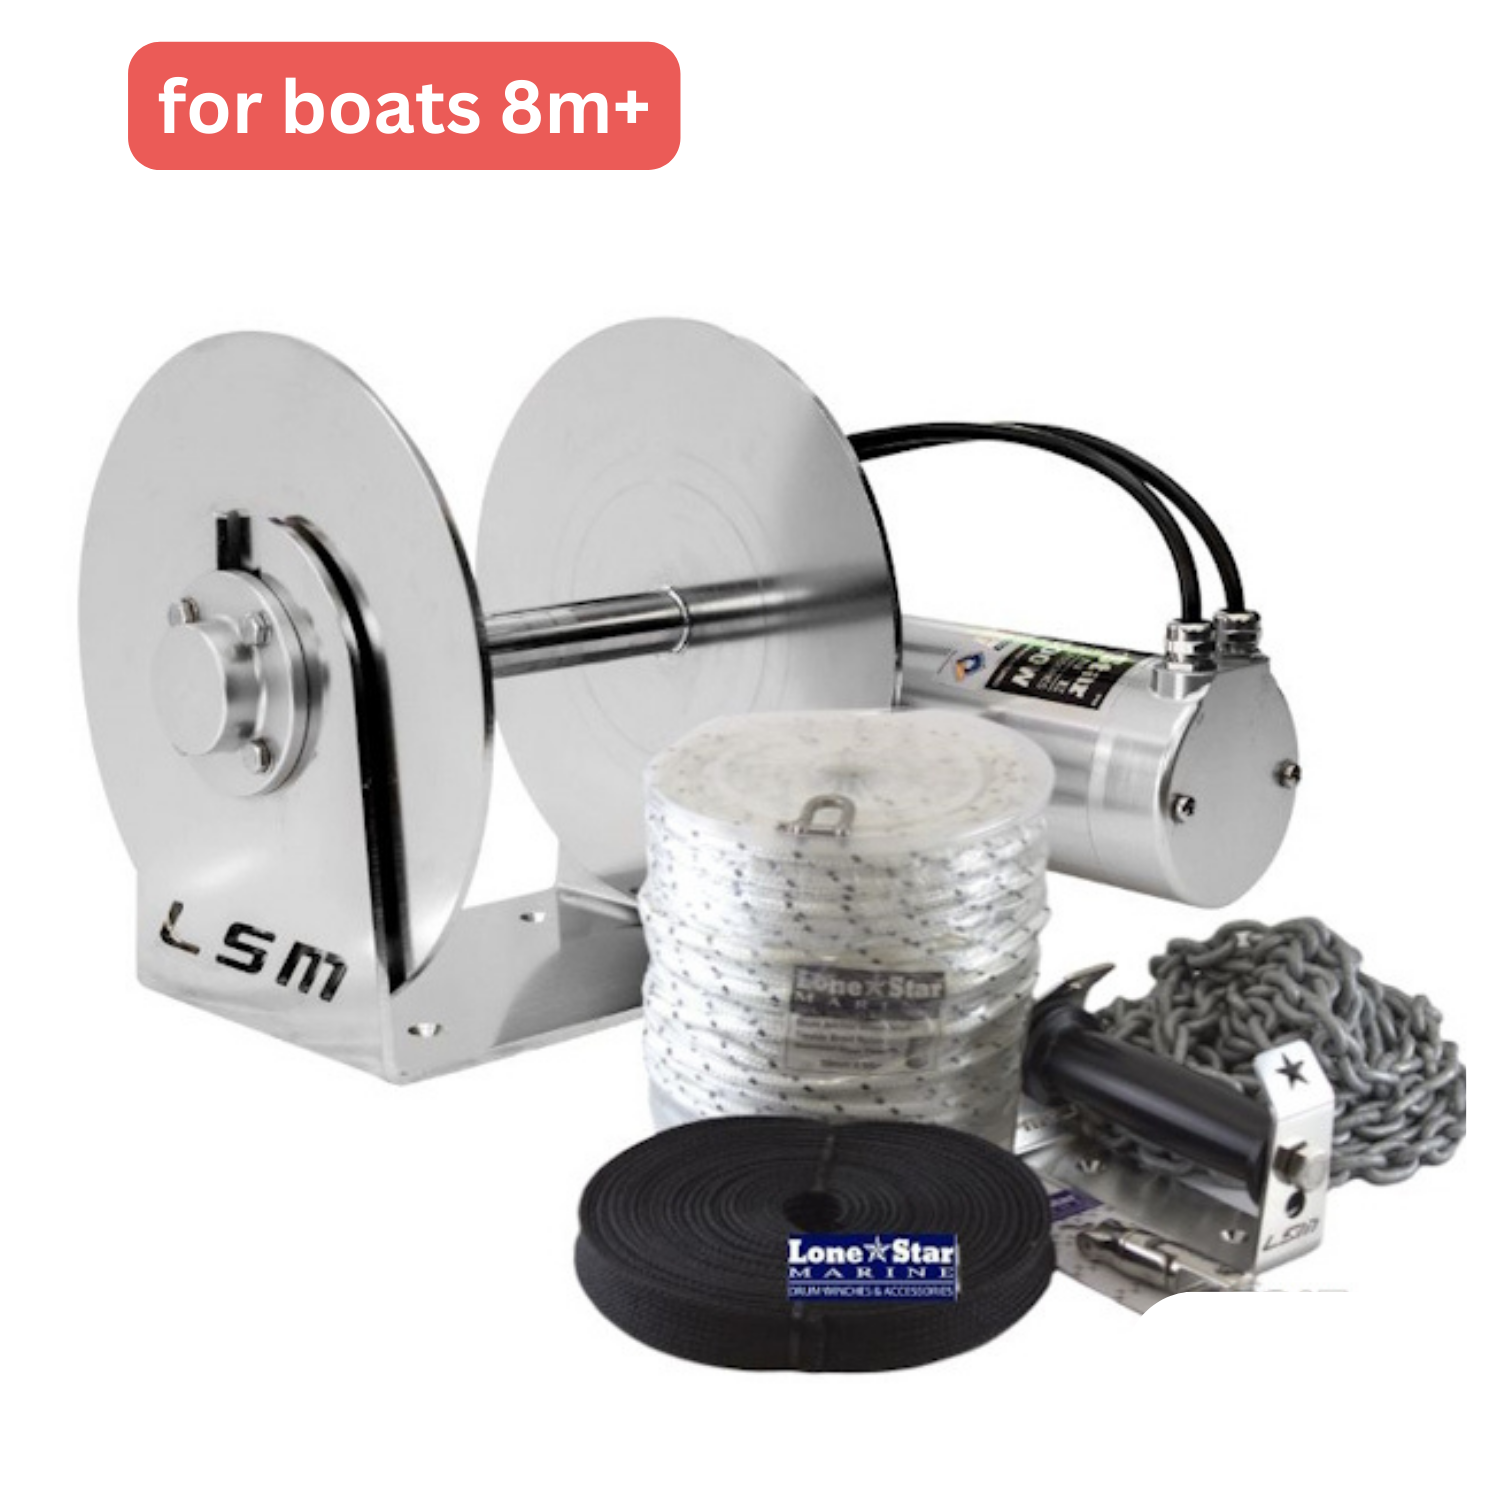 GX3 Anchor Winches for Boats 8m+